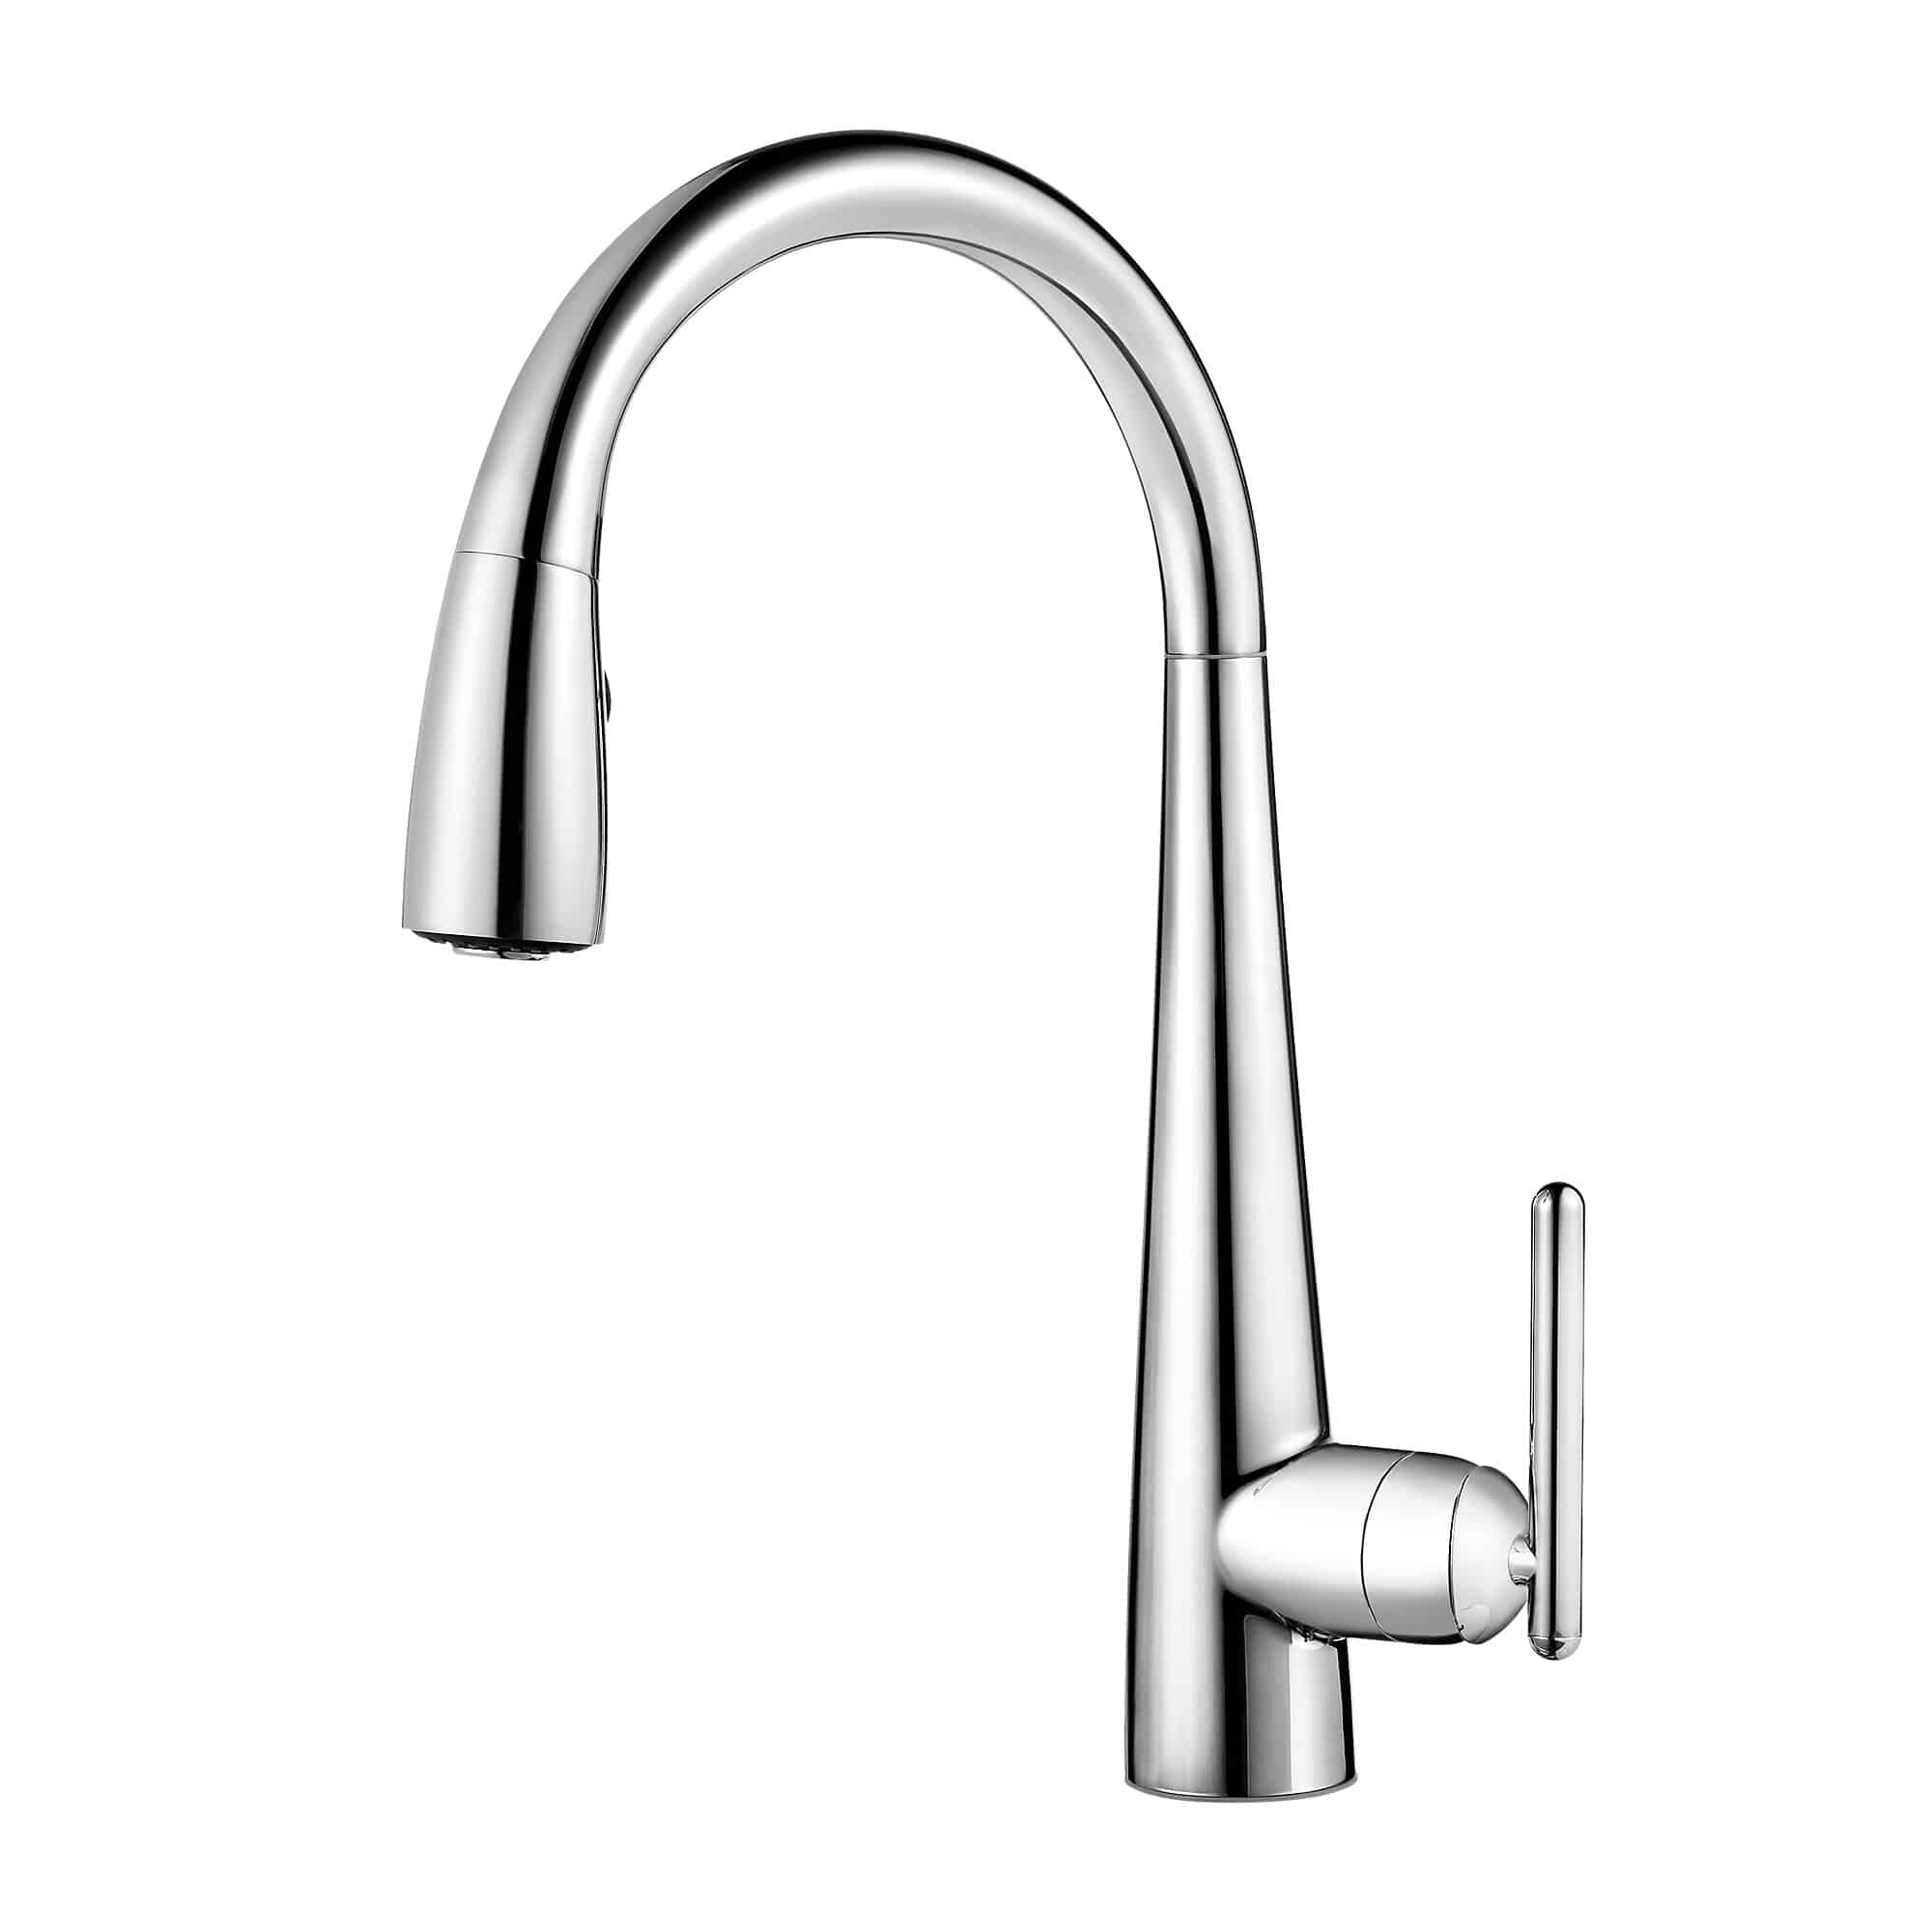 PFISTER GT529-FL LITA 16 3/4 INCH SINGLE LEVER HANDLE DECK MOUNT PULL-DOWN KITCHEN FAUCET WITH GE FILTRATION SYSTEM